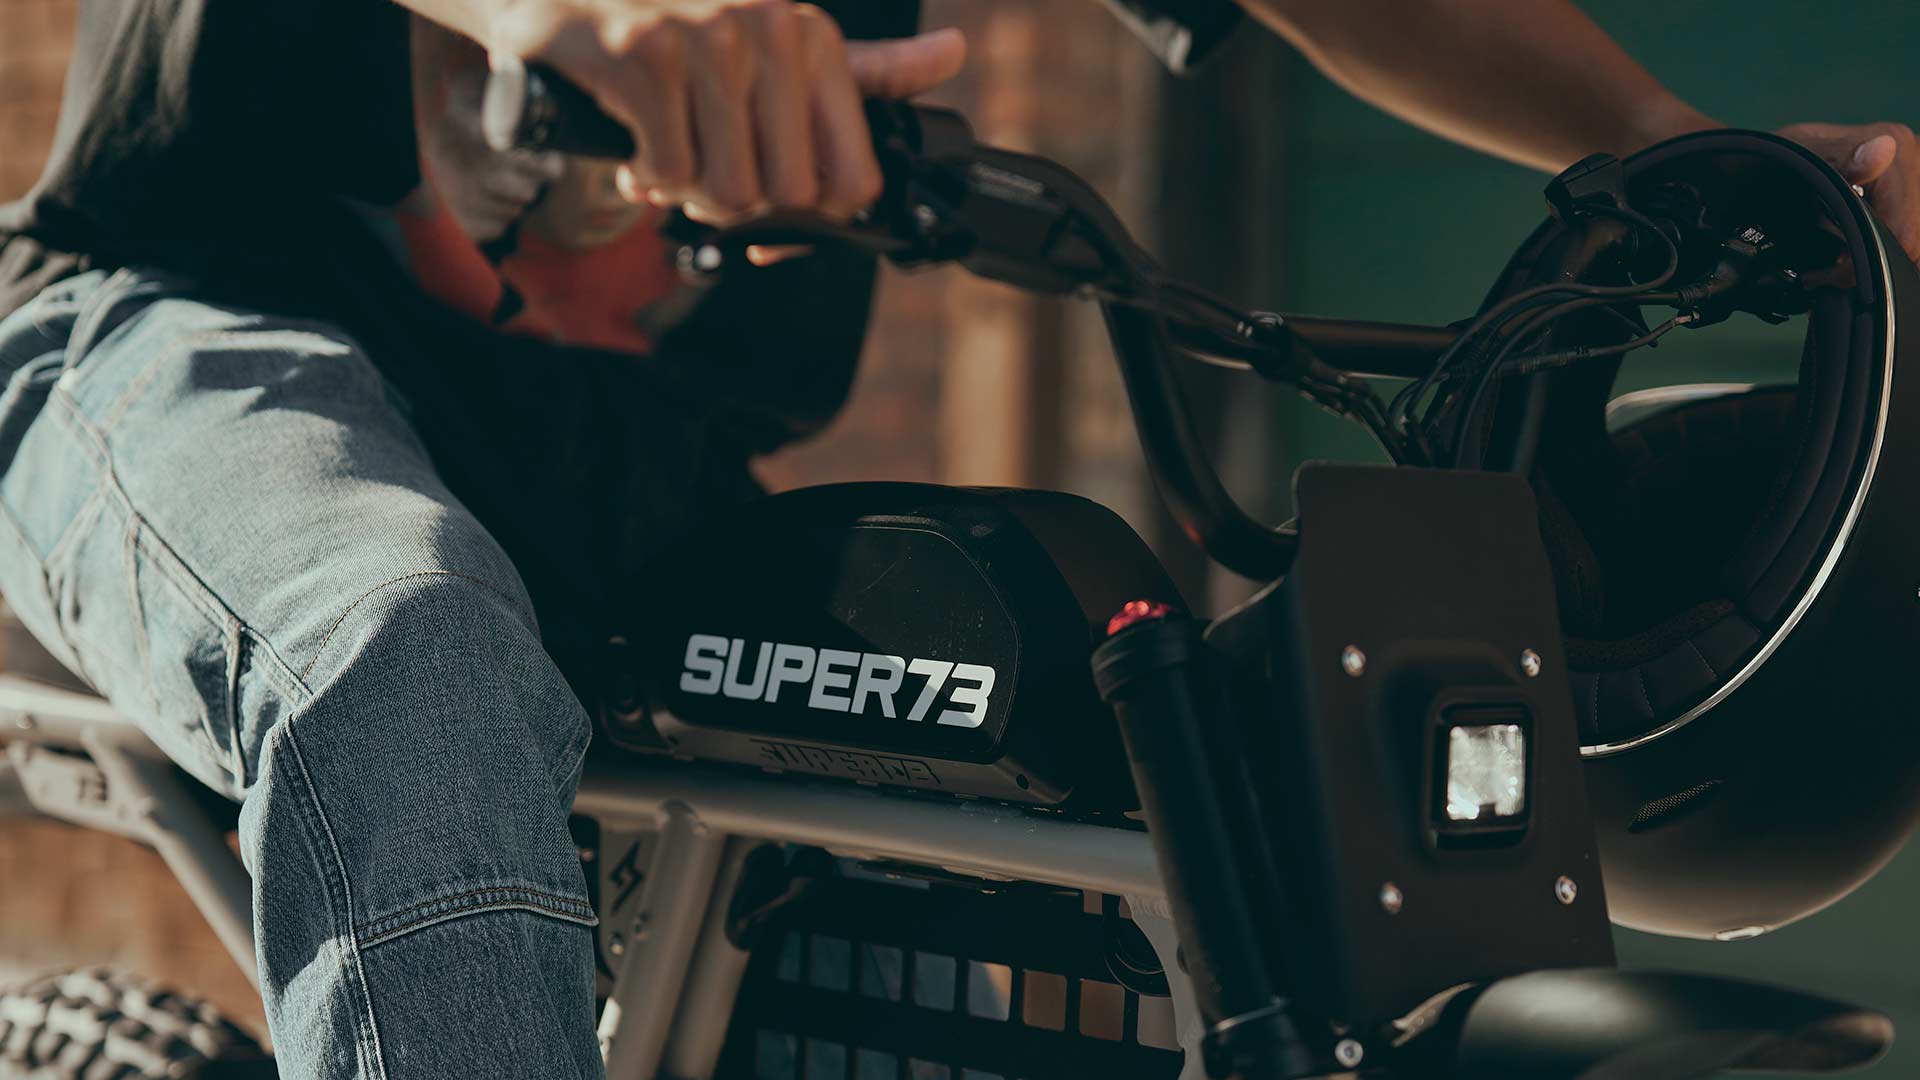 Closeup of the removable battery on the Super73 ebike, located on top of the frame